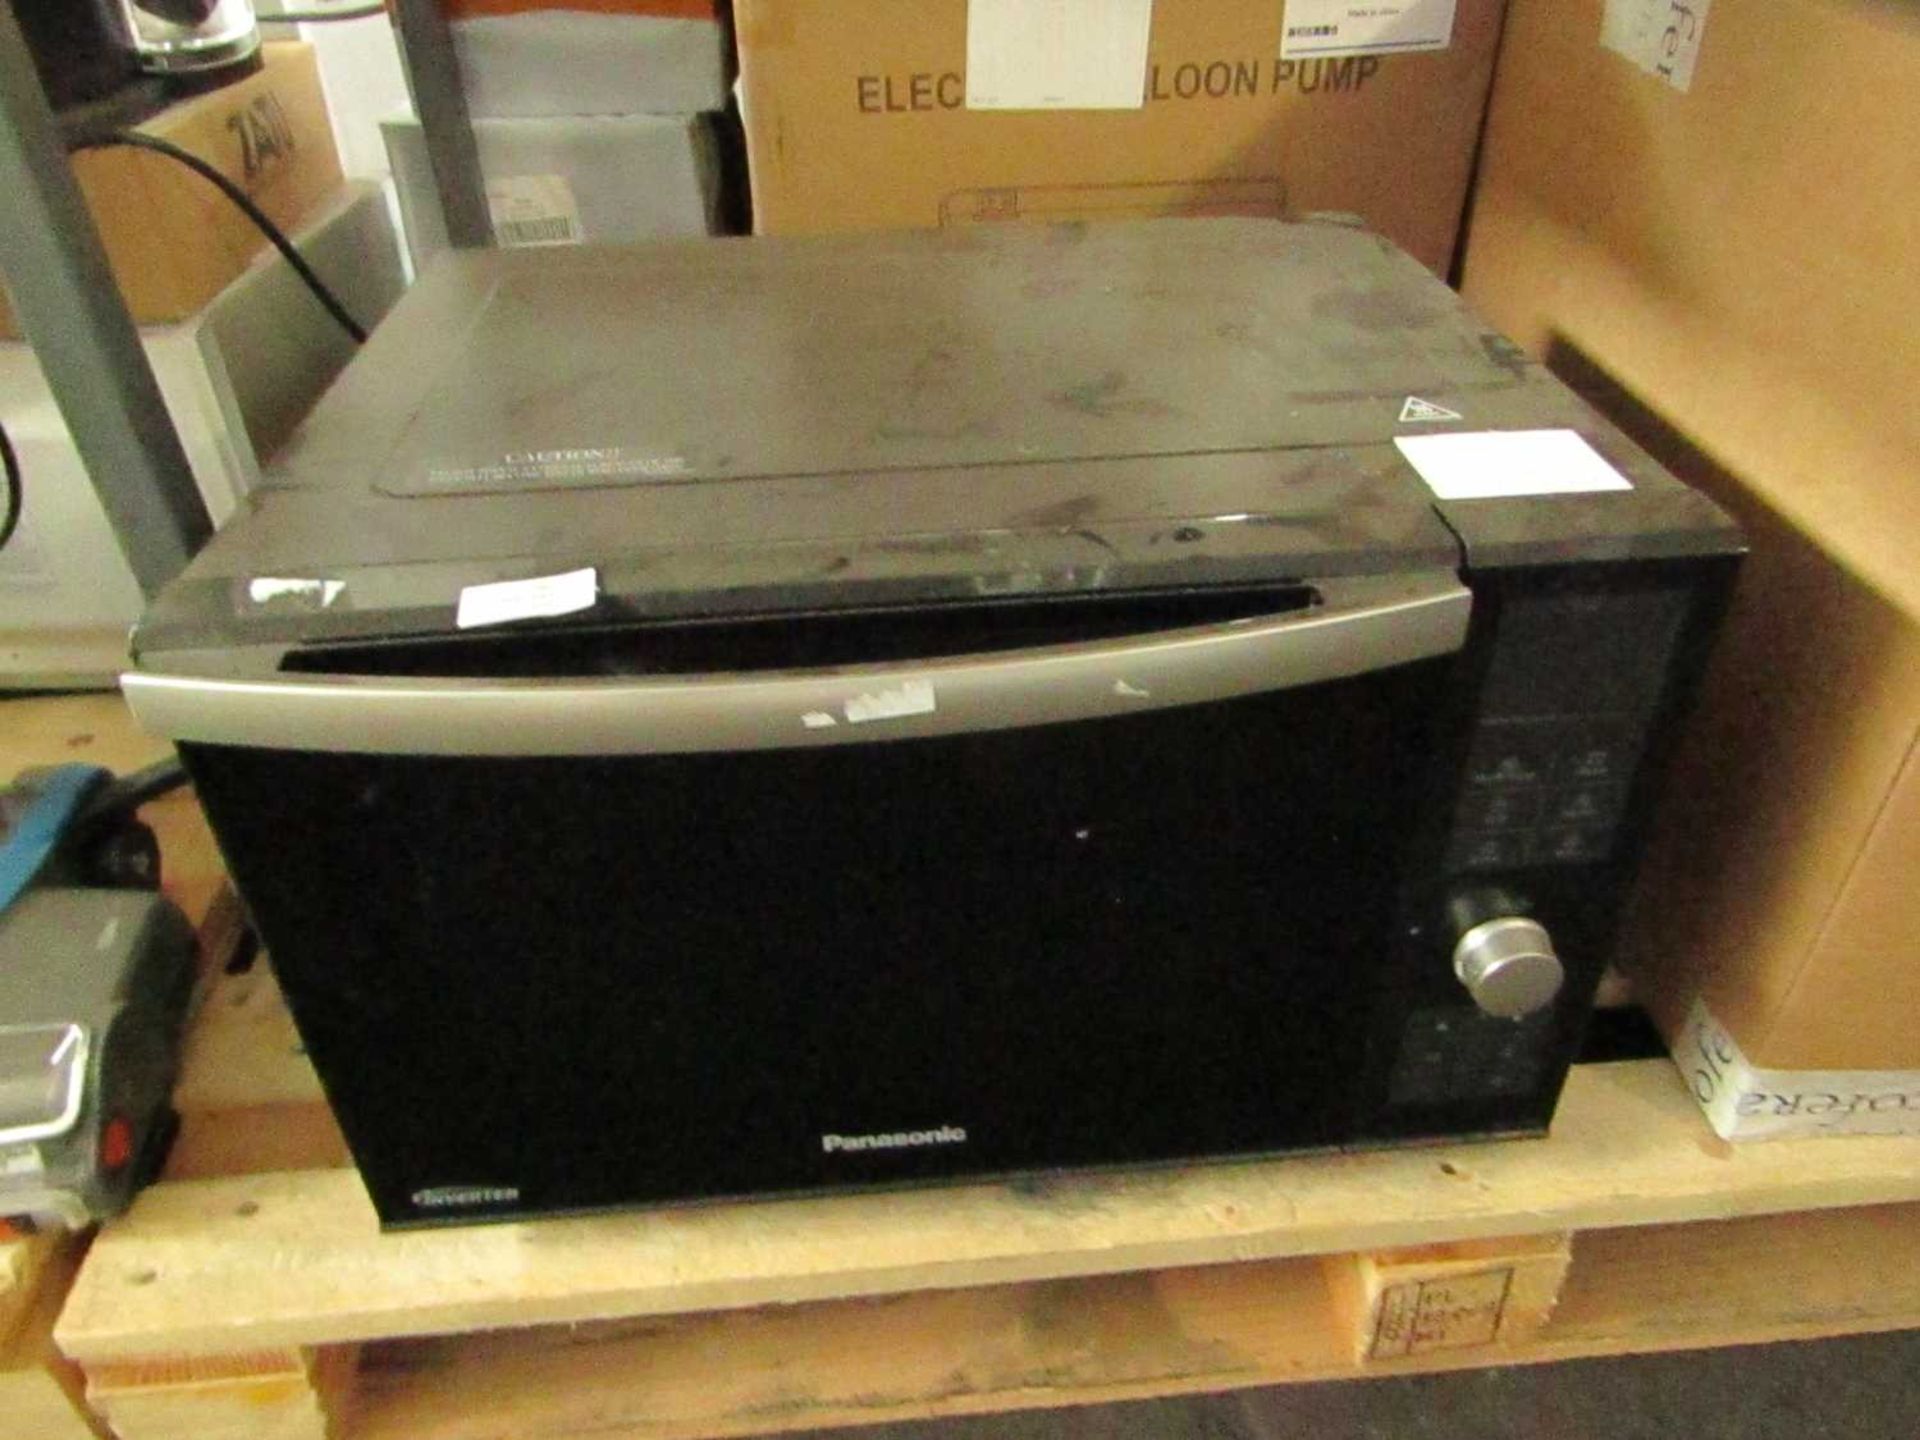 VAT Panasonic NN-DF3868 Inverter micro wave grill, tested working on Microwave full power setting,